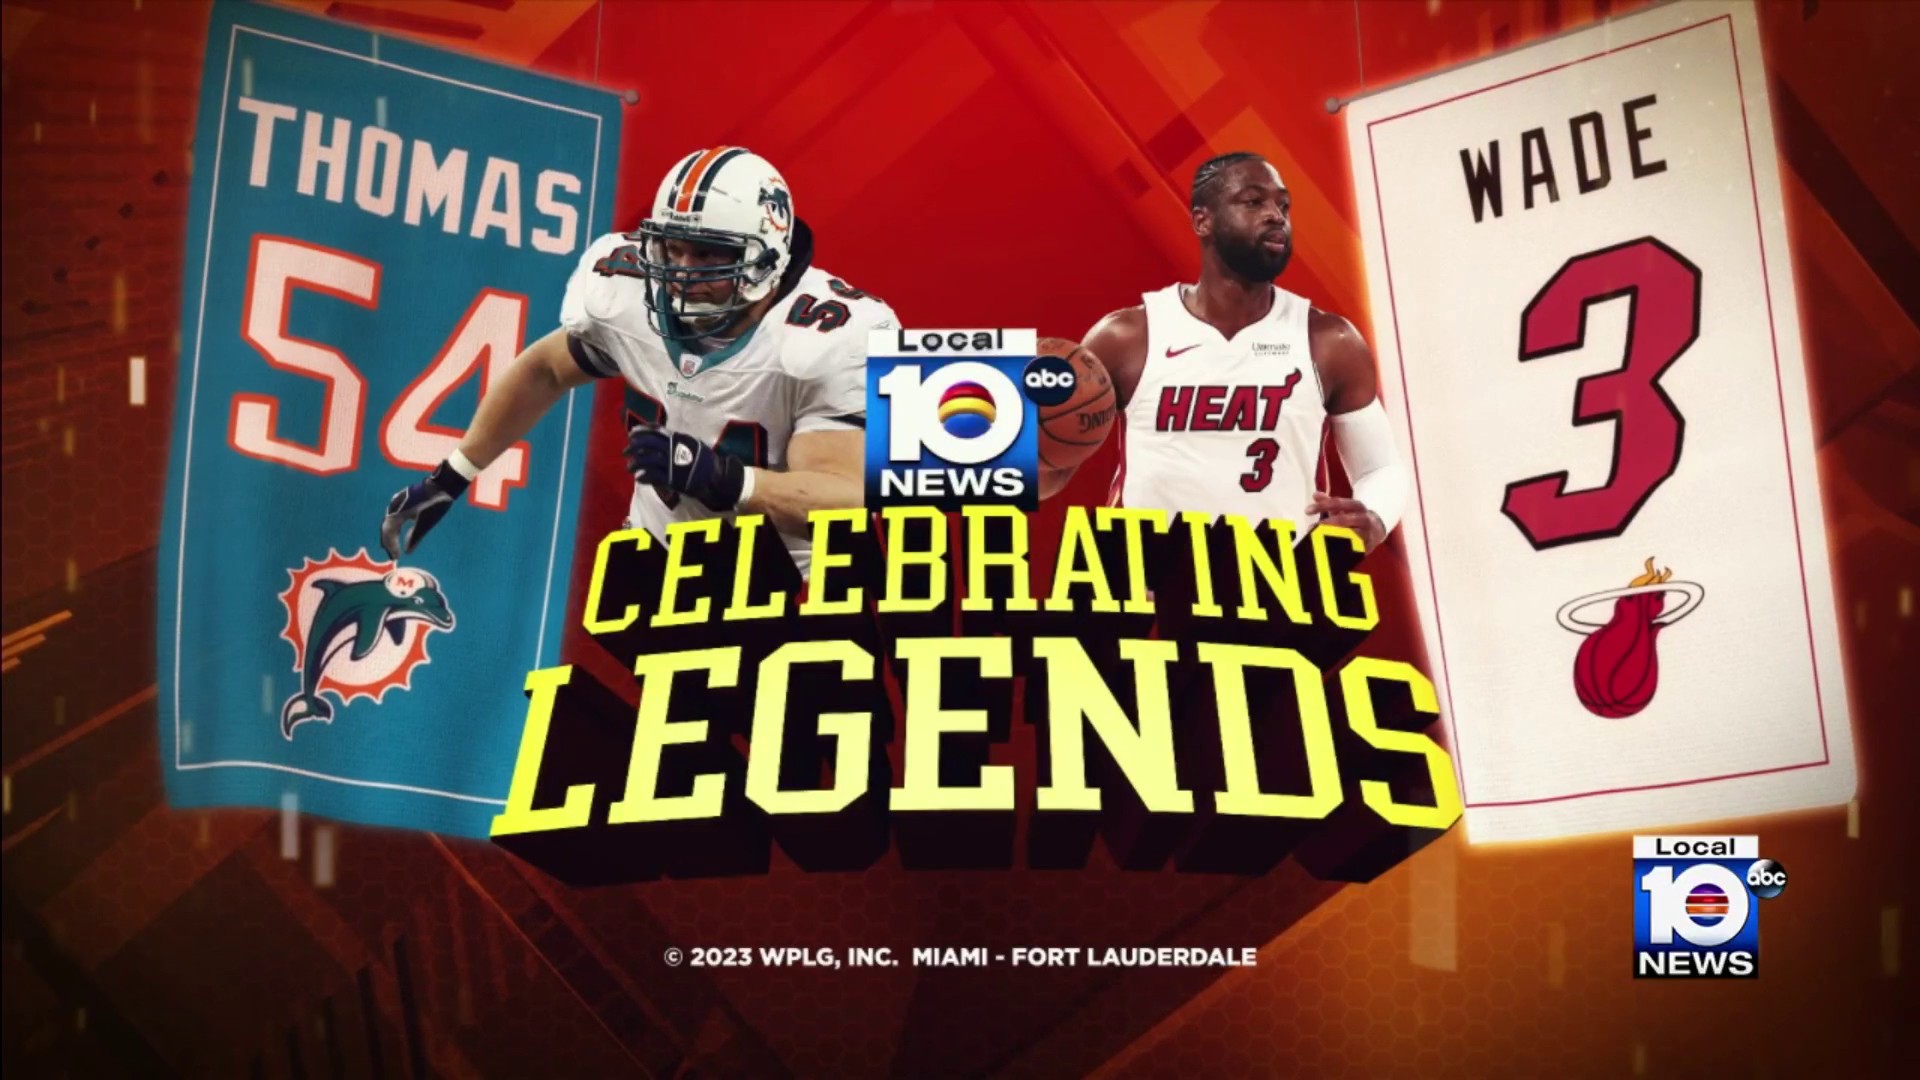 WATCH: Local 10 Special: 'Celebrating Legends